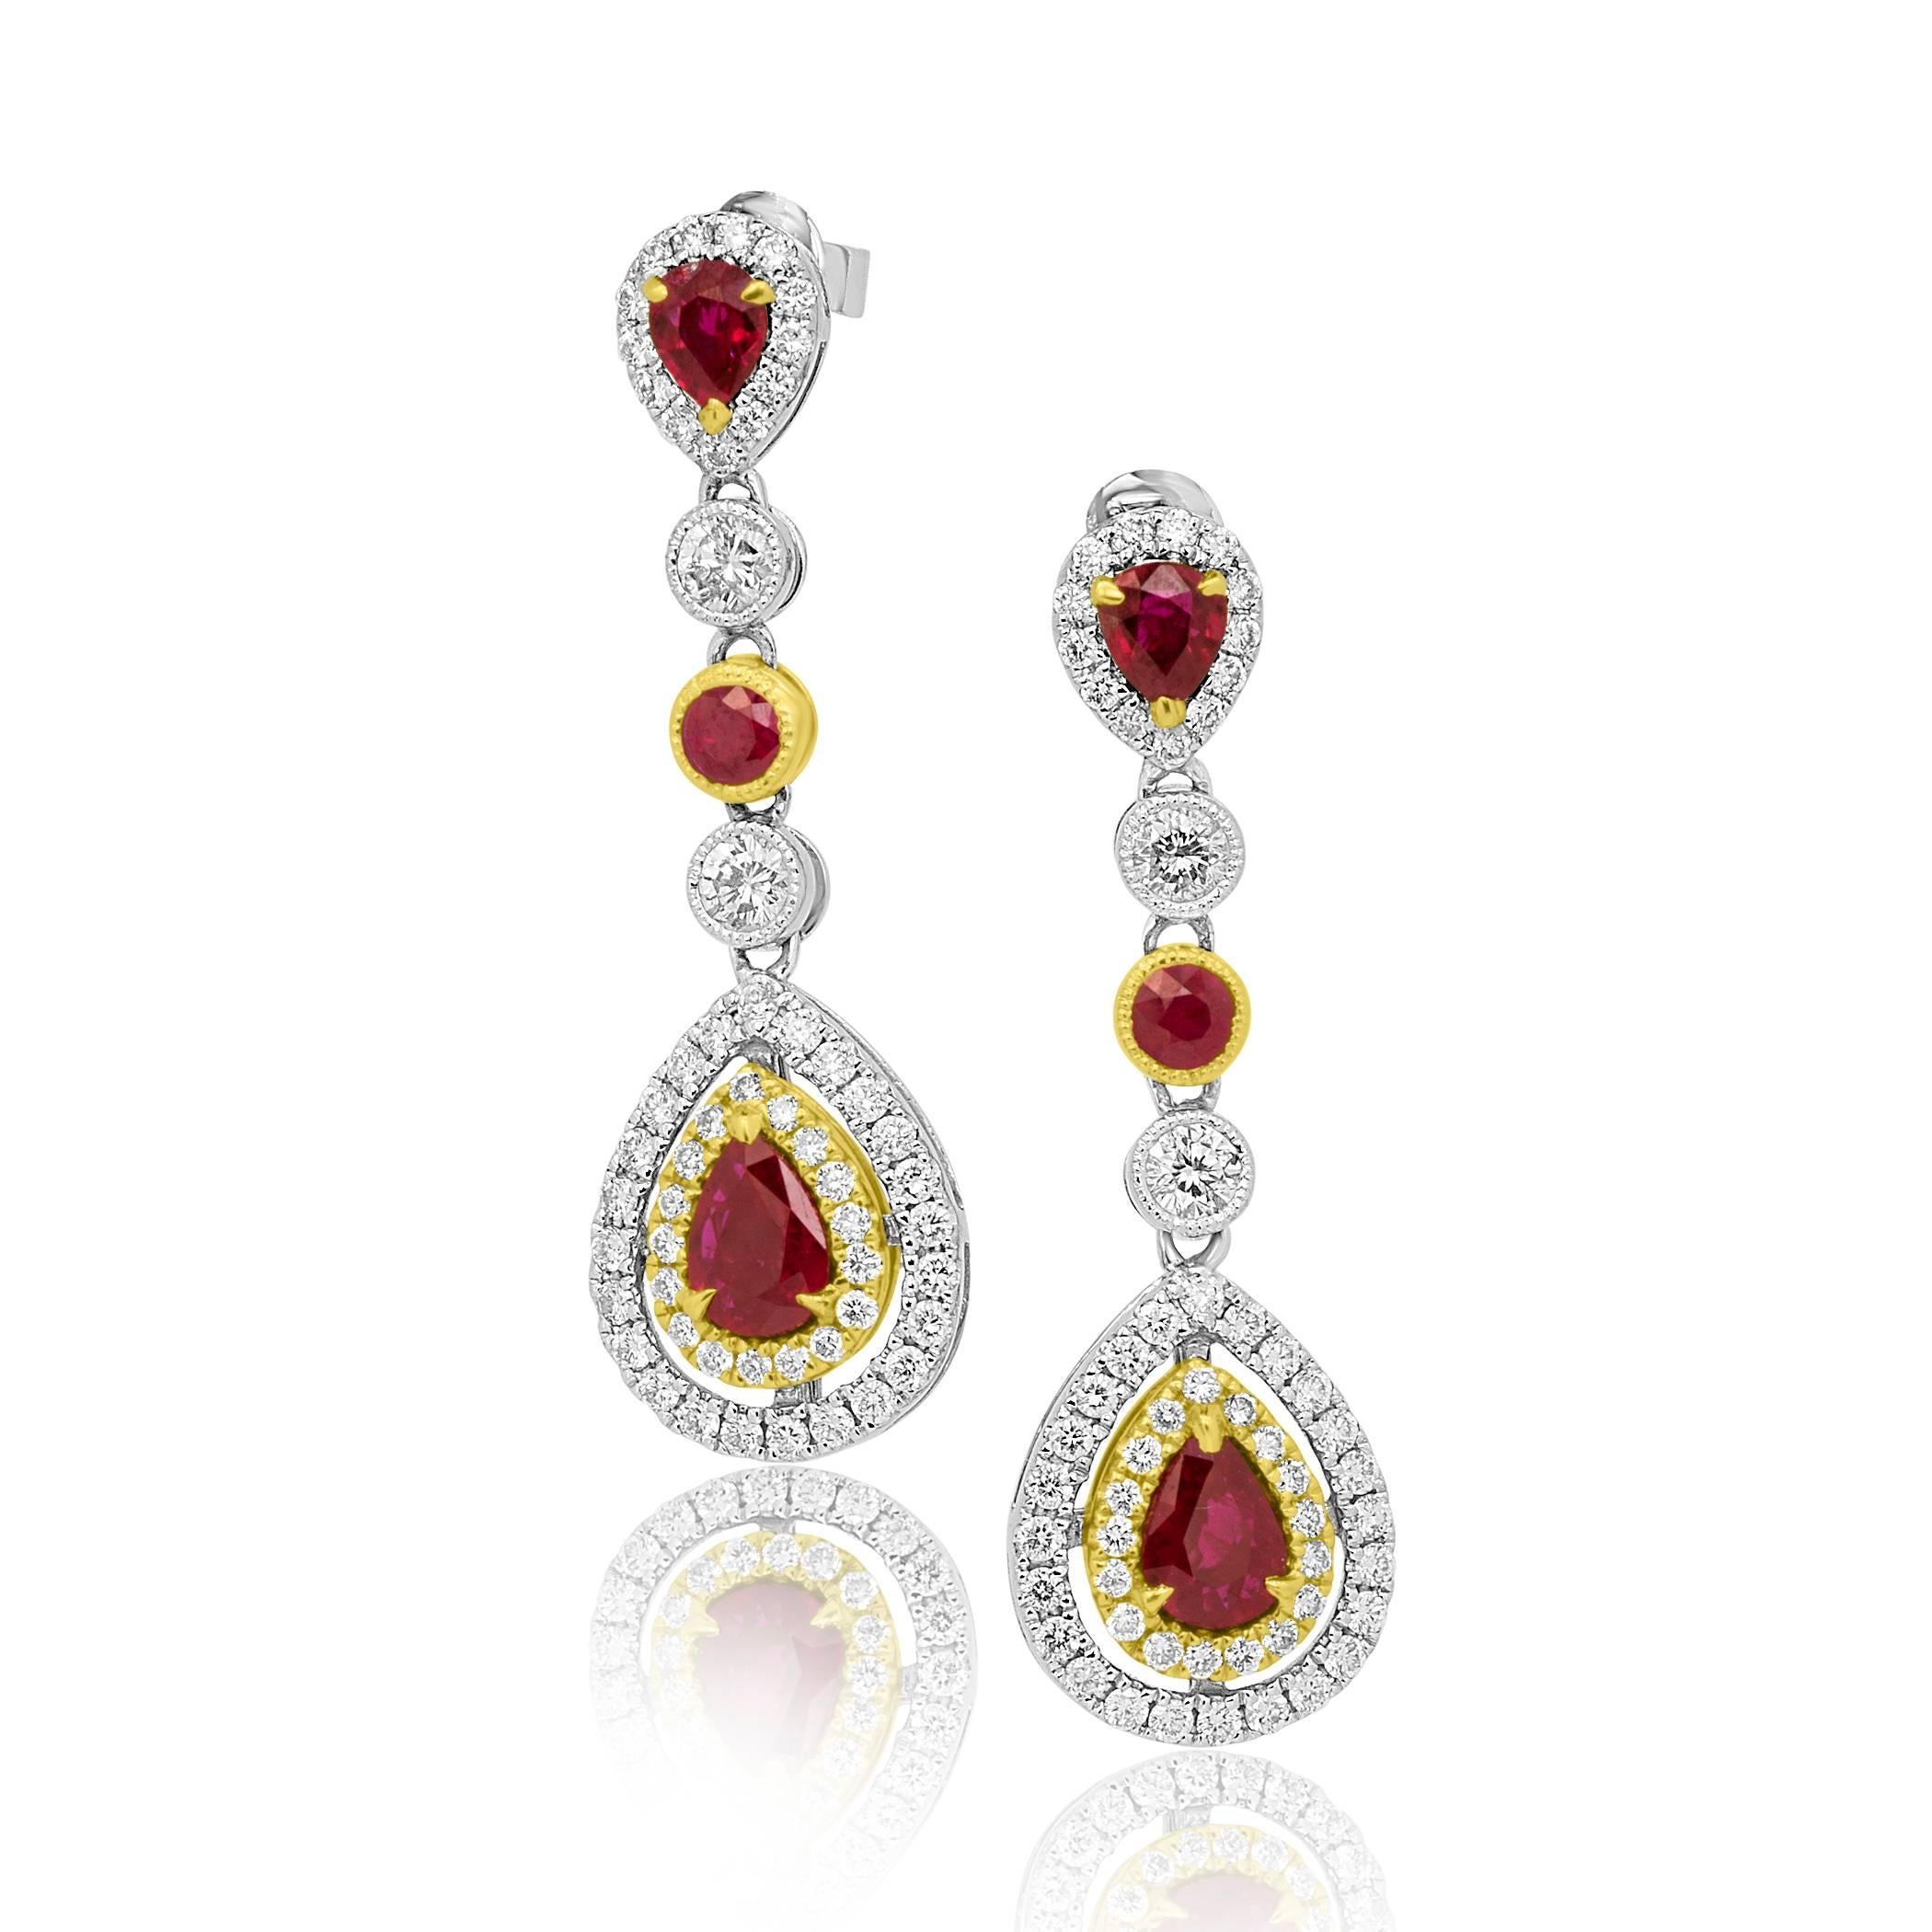 2 Pear shape Ruby 1.36 Carat encircled in double halo of White Diamonds with 2 Ruby Rounds 0.44 Carat in Bezel setting and 2 Ruby Pearshape 0.62 Carat encircled in single halo of white diamonds. 

Diamonds total weight 1.90 Carat 
Natural Rubies